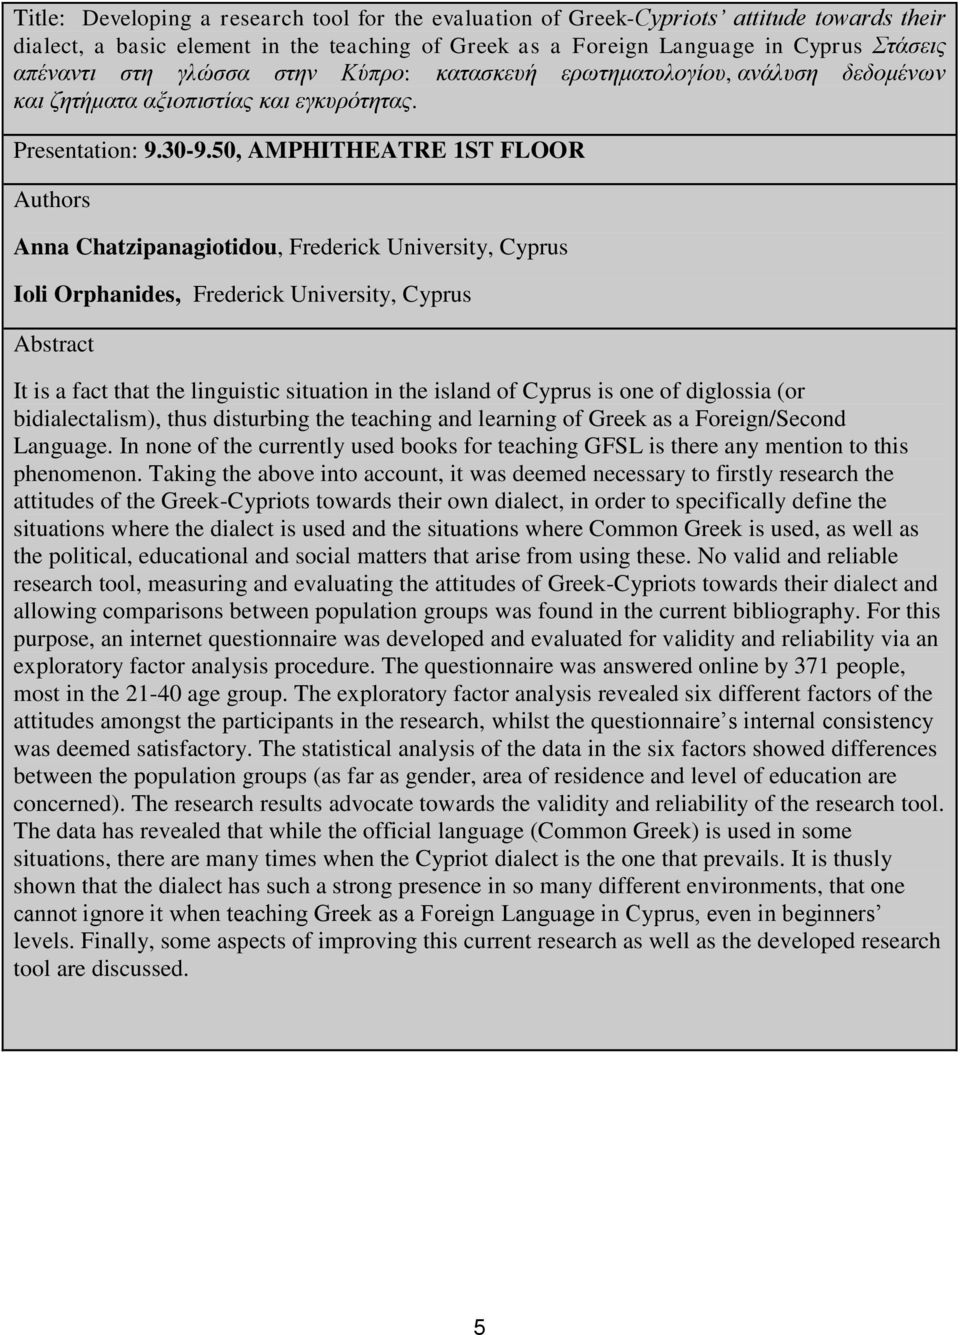 50, AMPHITHEATRE 1ST FLOOR s Anna Chatzipanagiotidou, Frederick University, Cyprus Ioli Orphanides, Frederick University, Cyprus It is a fact that the linguistic situation in the island of Cyprus is